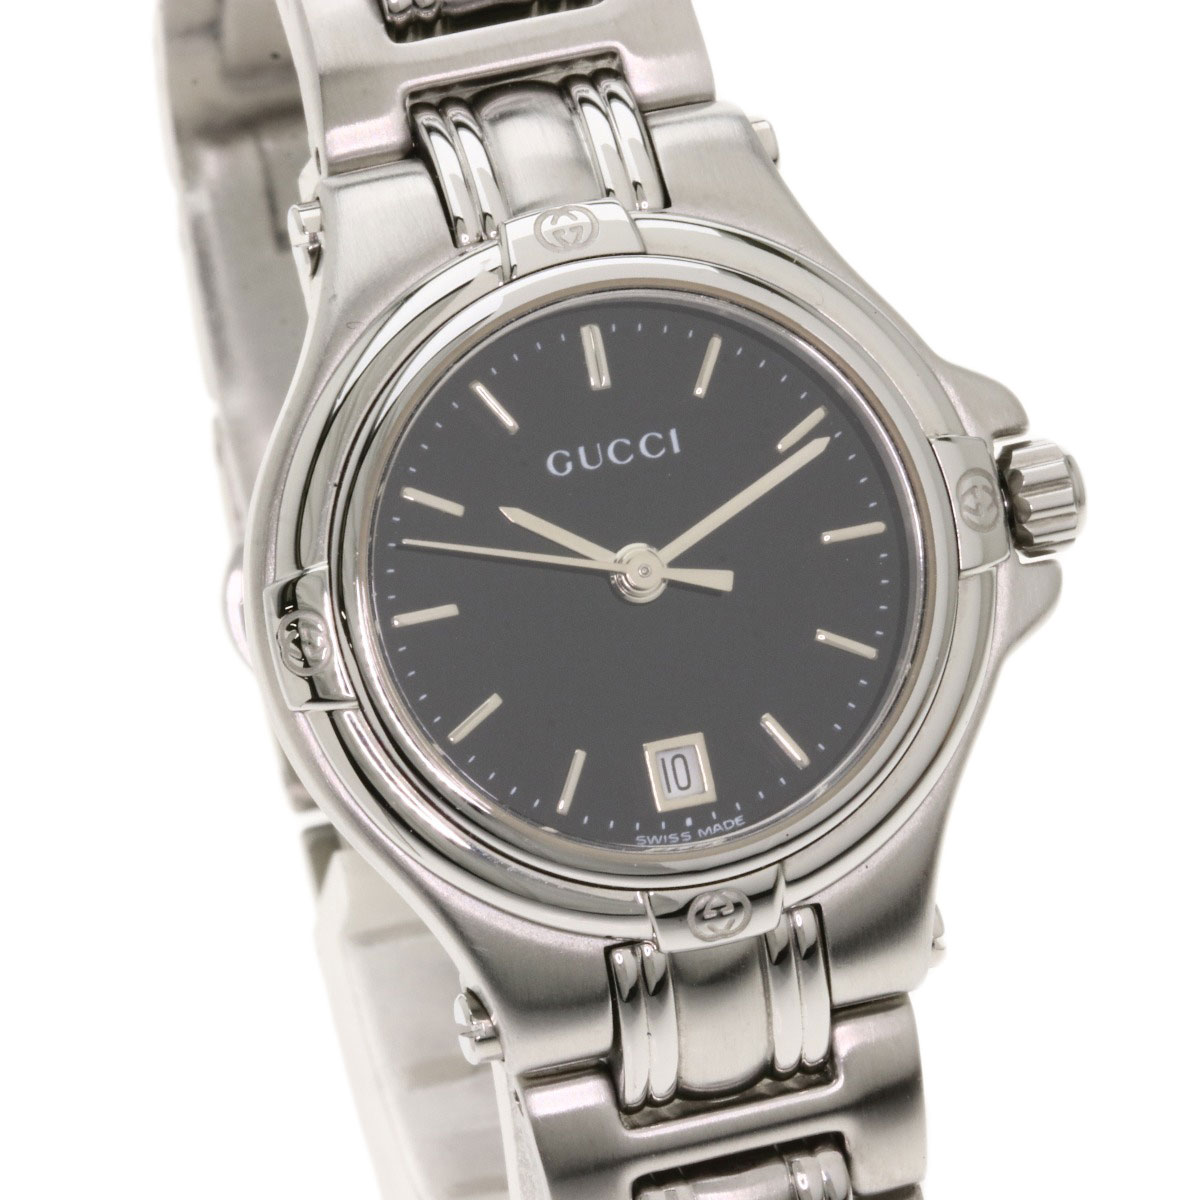 GUCCI Round face Watches 9040L Stainless Steel/Stainless Steel Ladies ...